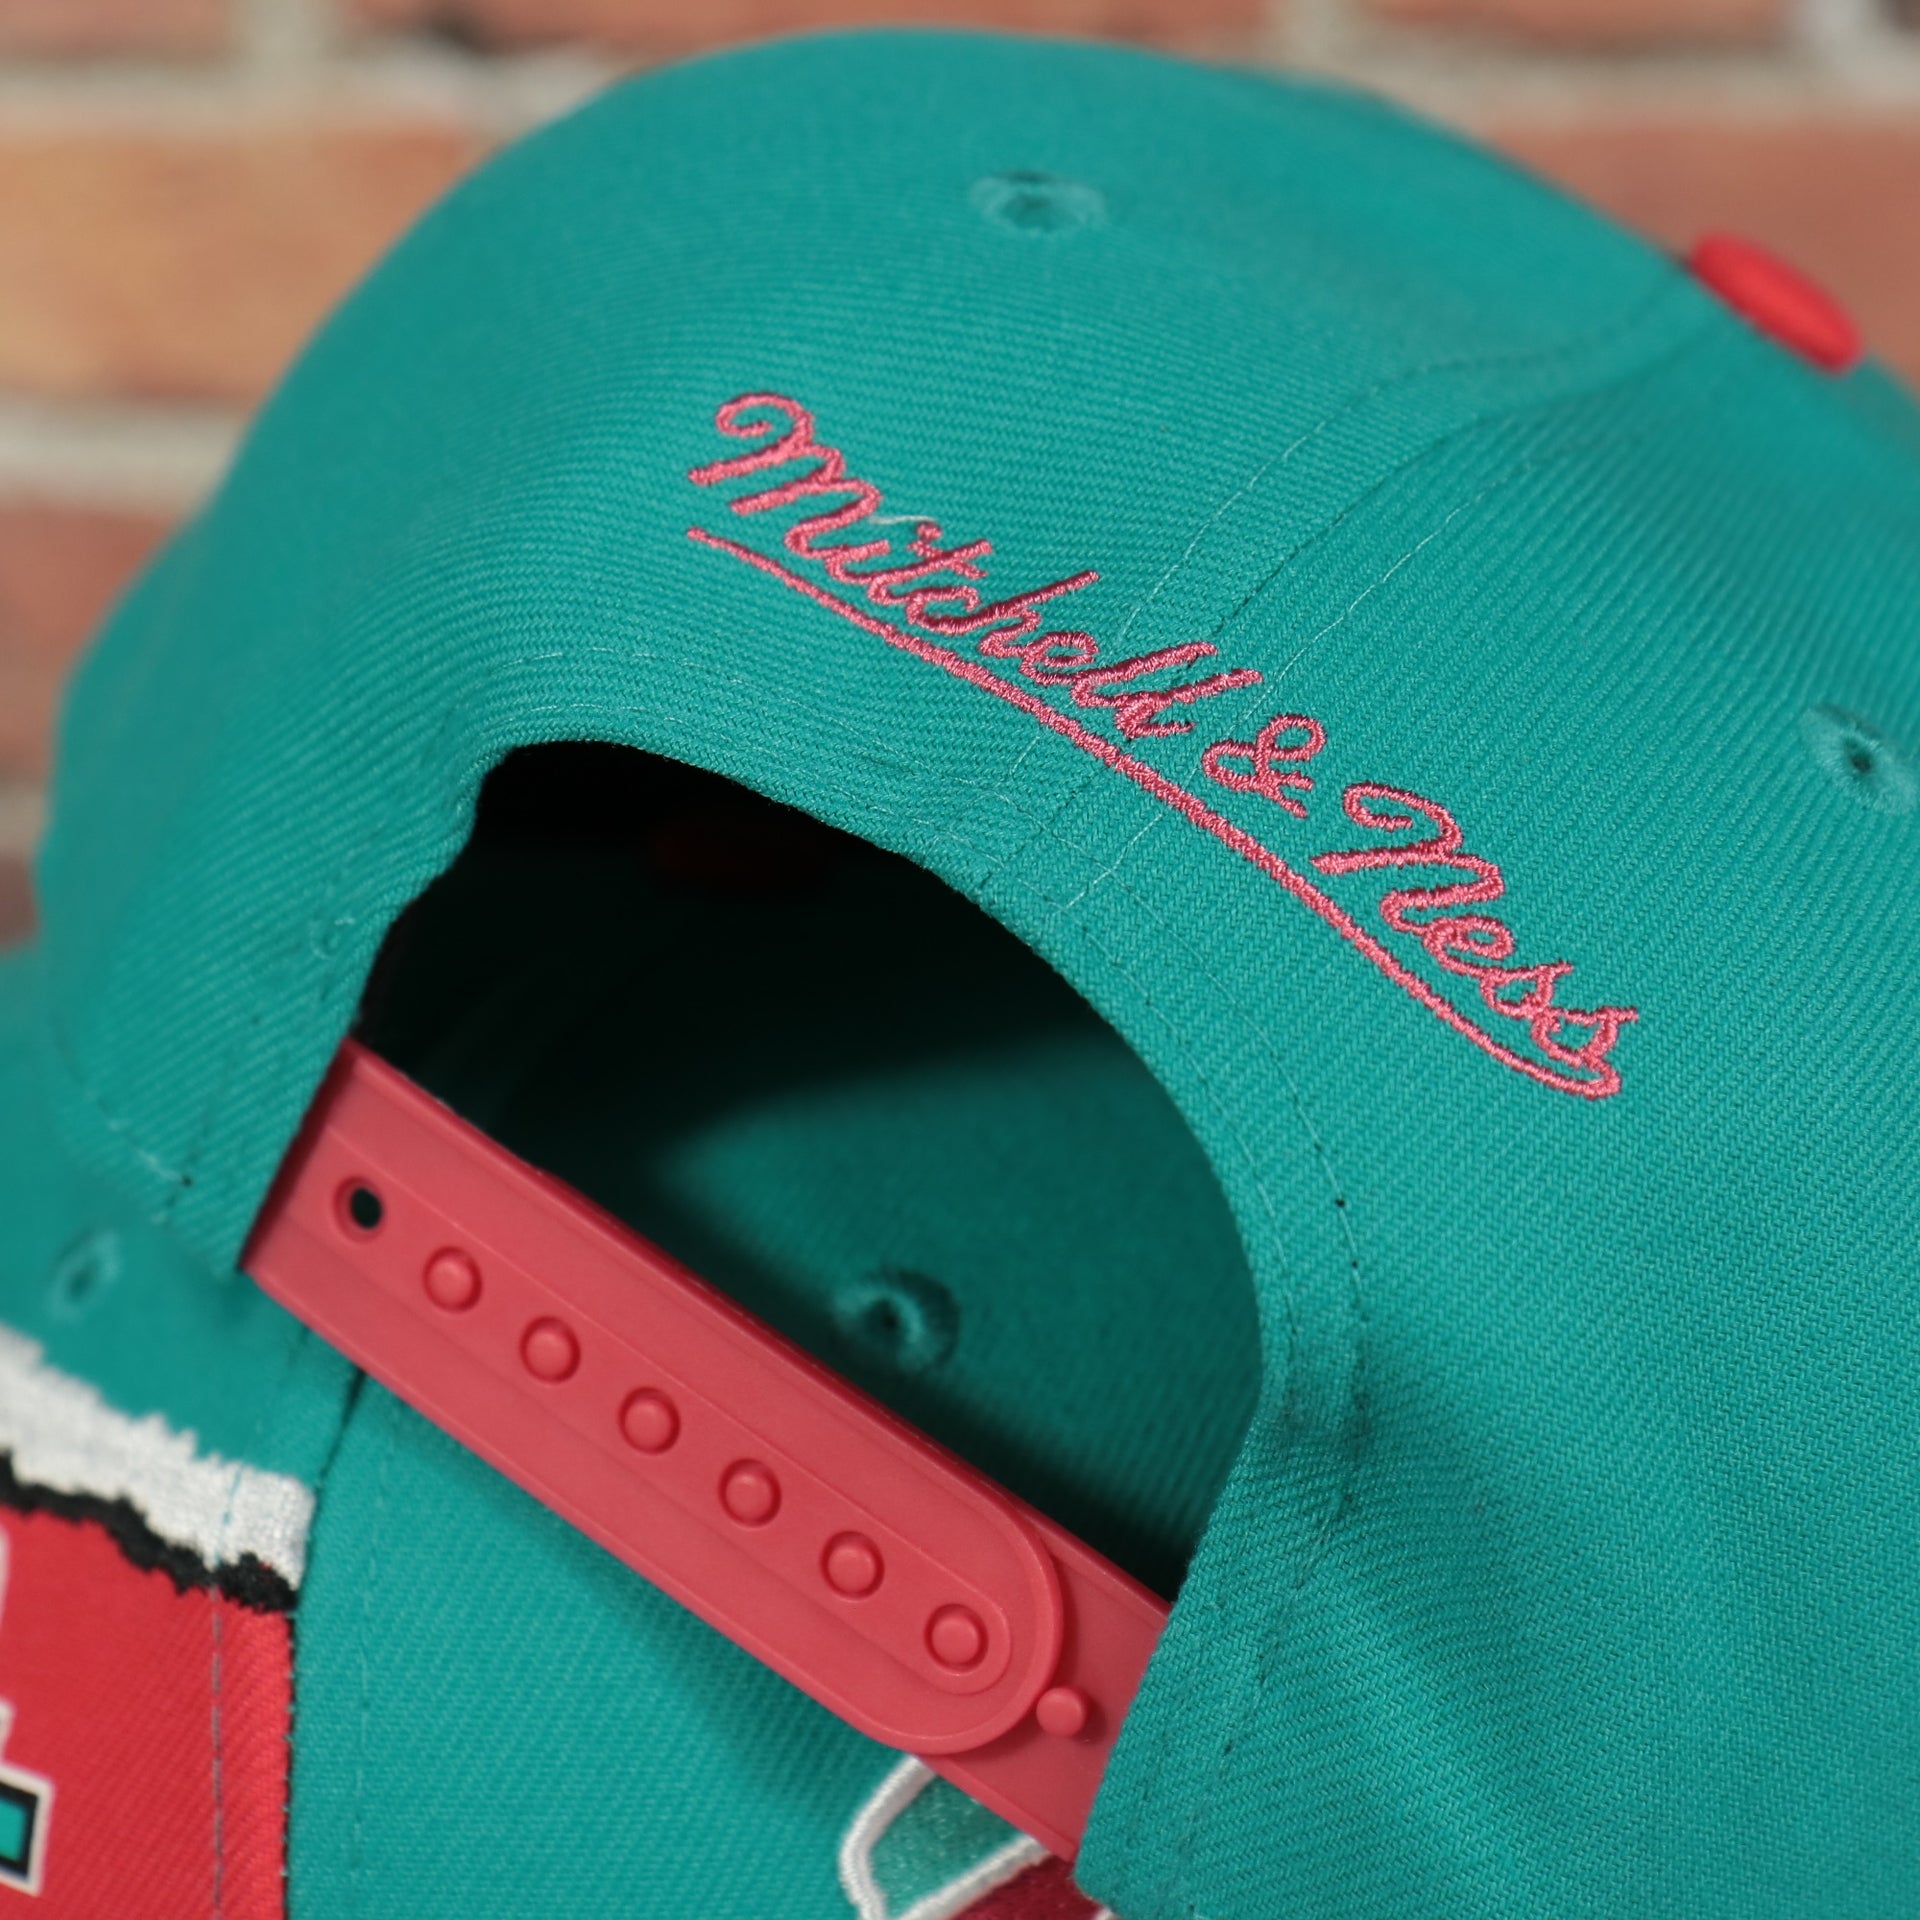 mitchell and ness logo on the San Antonio Spurs Hardwood Classics Jumbotron Spurs Ripped Logo side patch Grey Bottom Teal/Red Snapback hat | Mitchell and Ness Two Tone Snap Cap